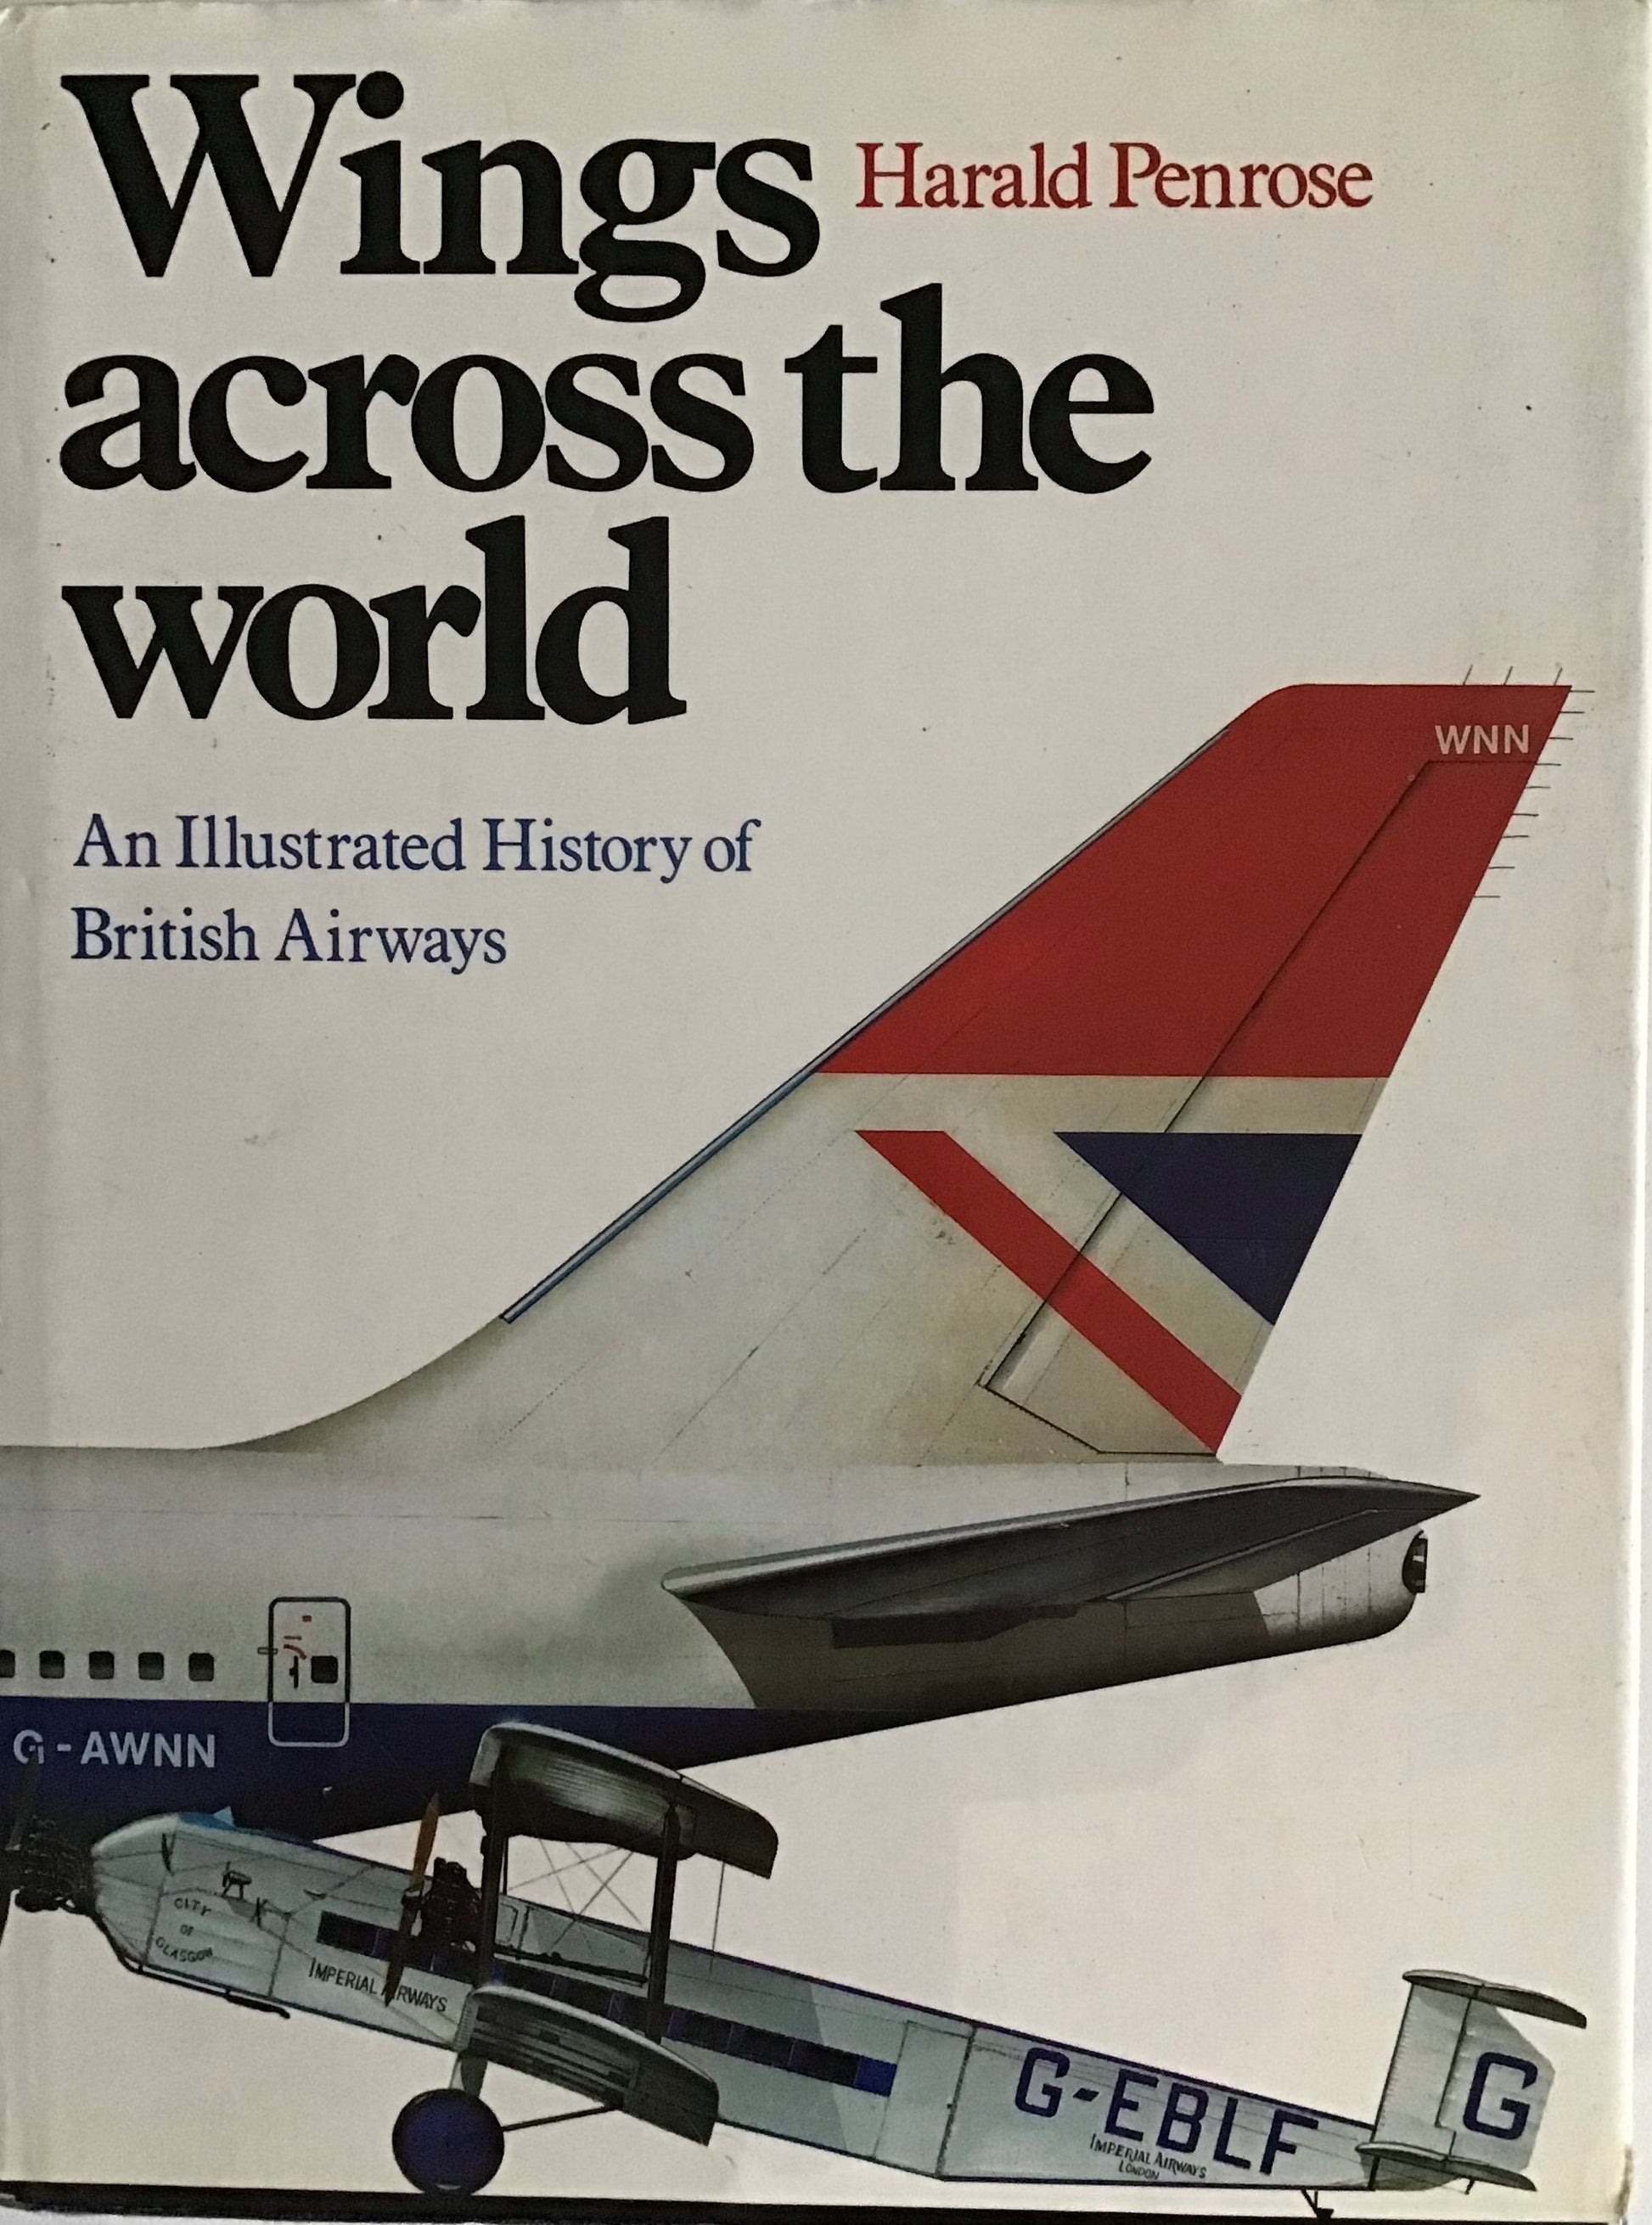 Wings Across the World: An Illustrated History of British Airways by Harald Penrose - Chester Model Centre